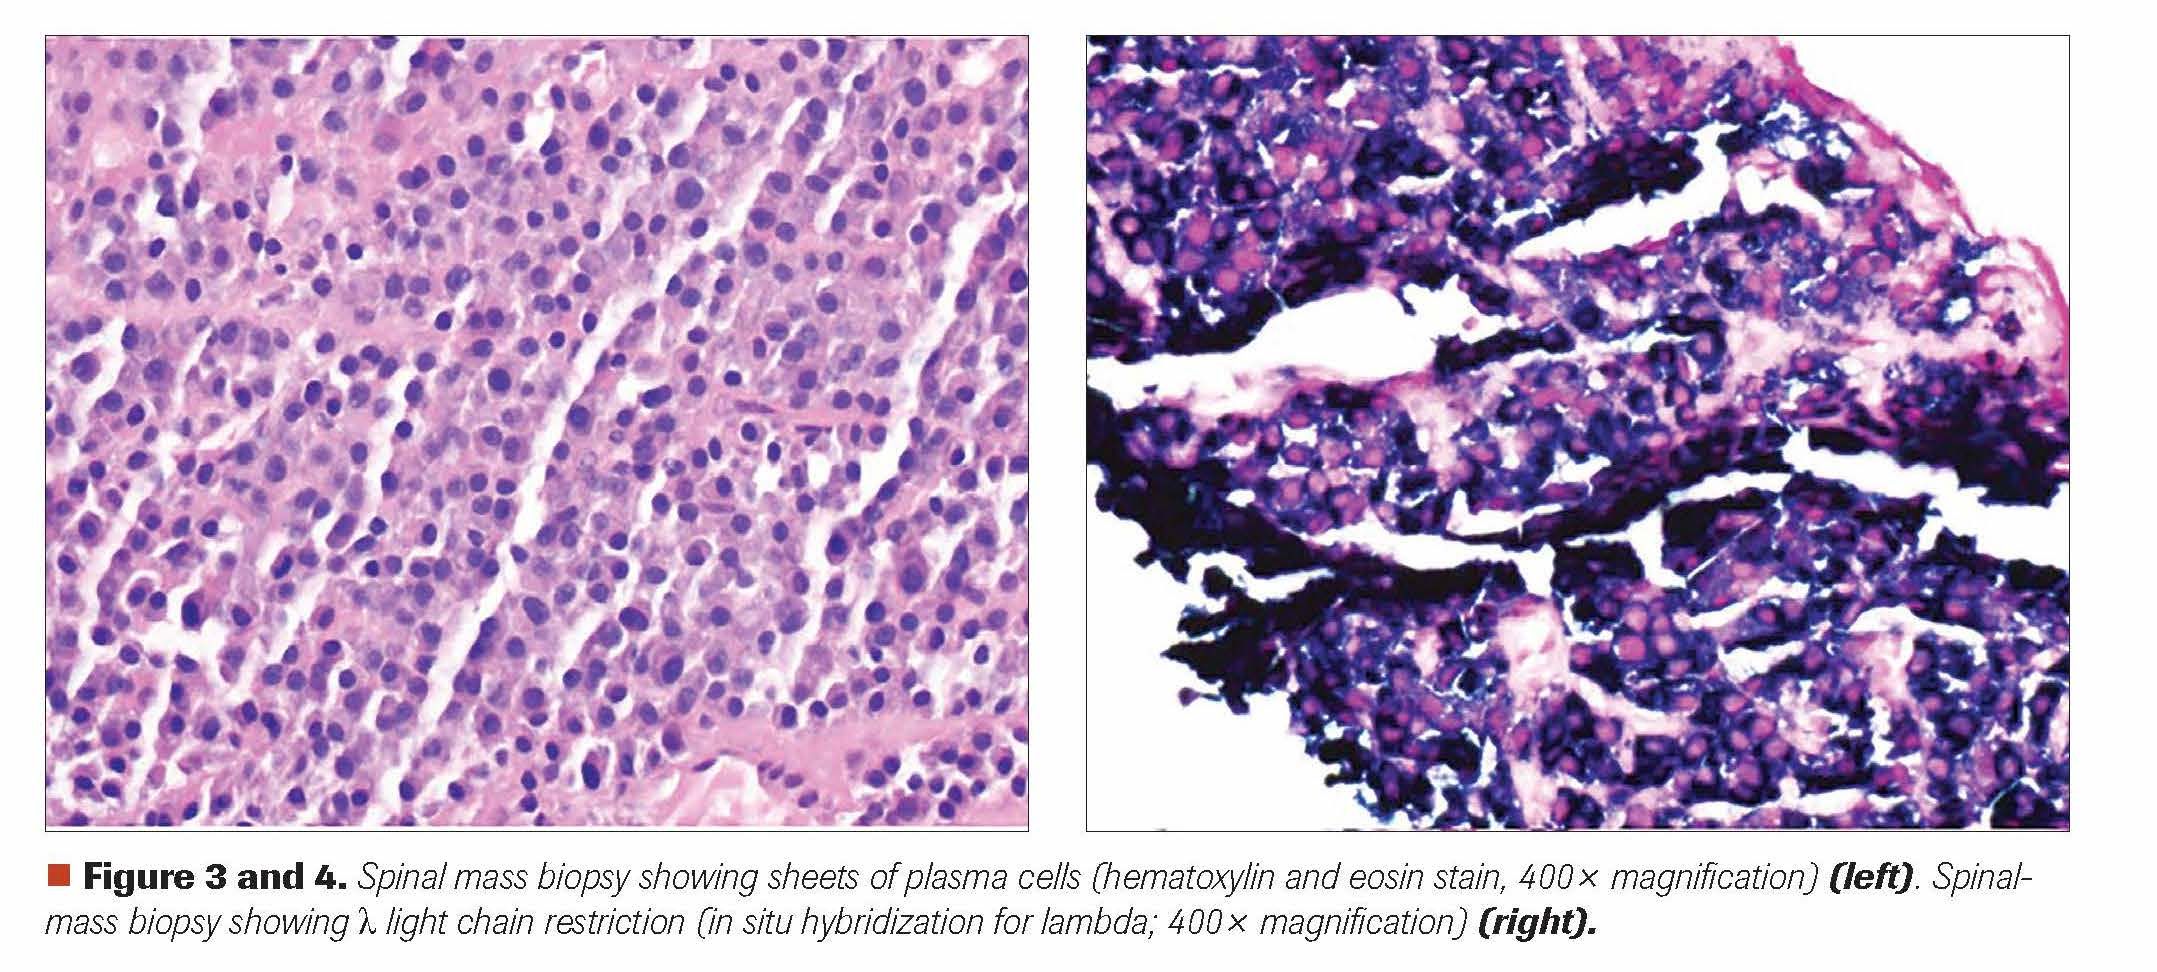 Figure 3 and 4. Spinal mass biopsy showing sheets of plasma cells (hematoxylin and eosin stain, 400x magnification) (left). Spinalmass biopsy showing λ light chain restriction (in situ hybridization for lambda; 400x magnification) (right).